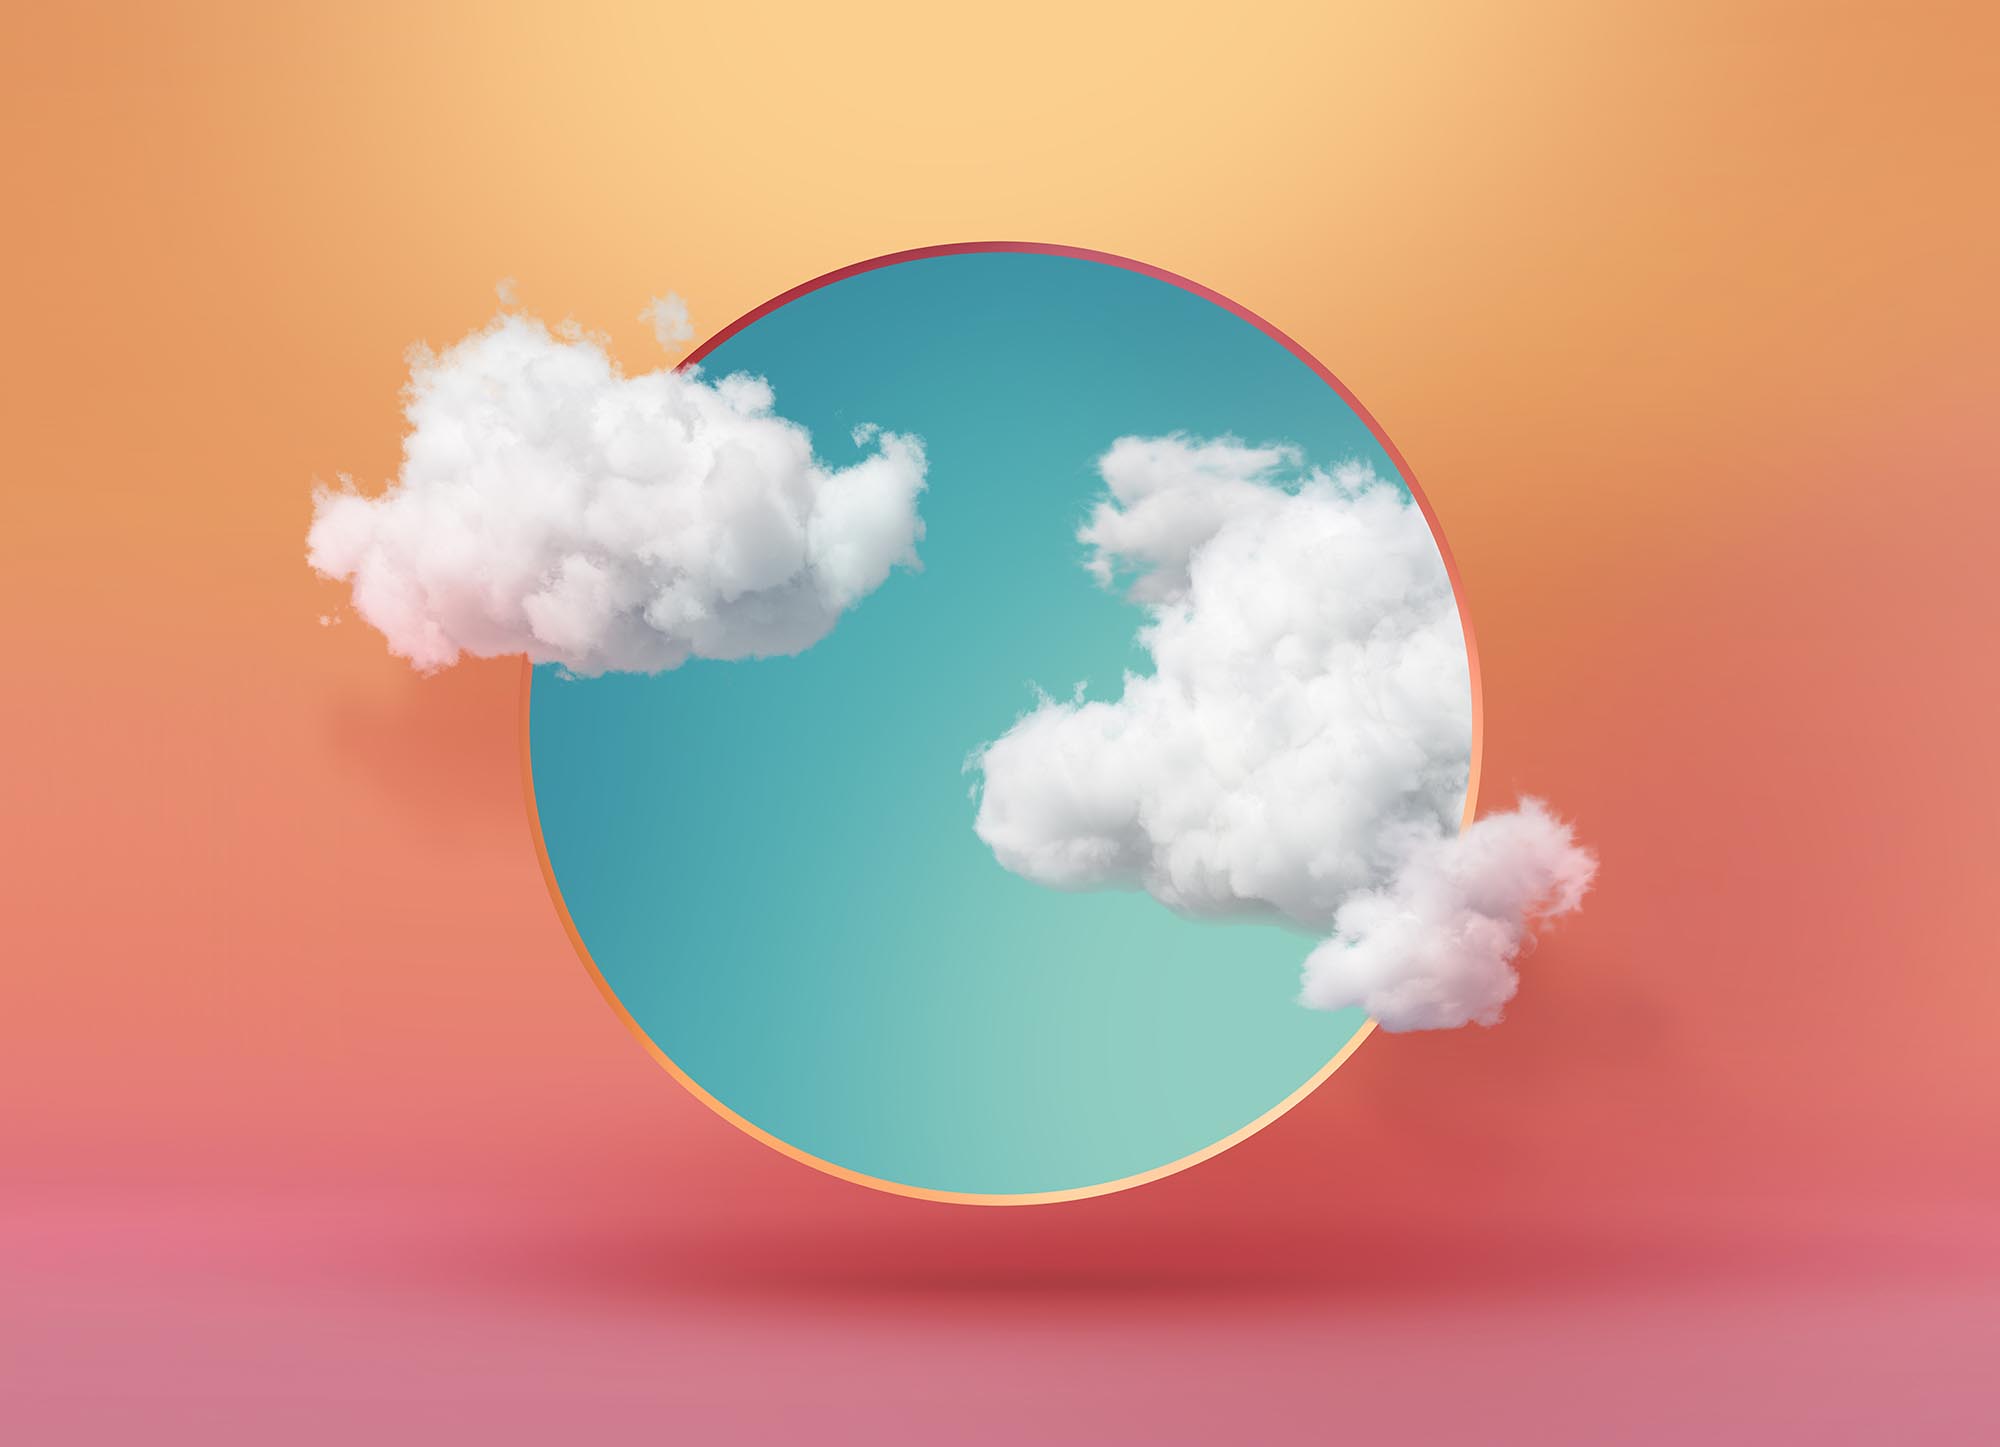 abstract wallpaper, blue sky with white clouds fly out the round hole, peachy background. Weather concept, optical illusion